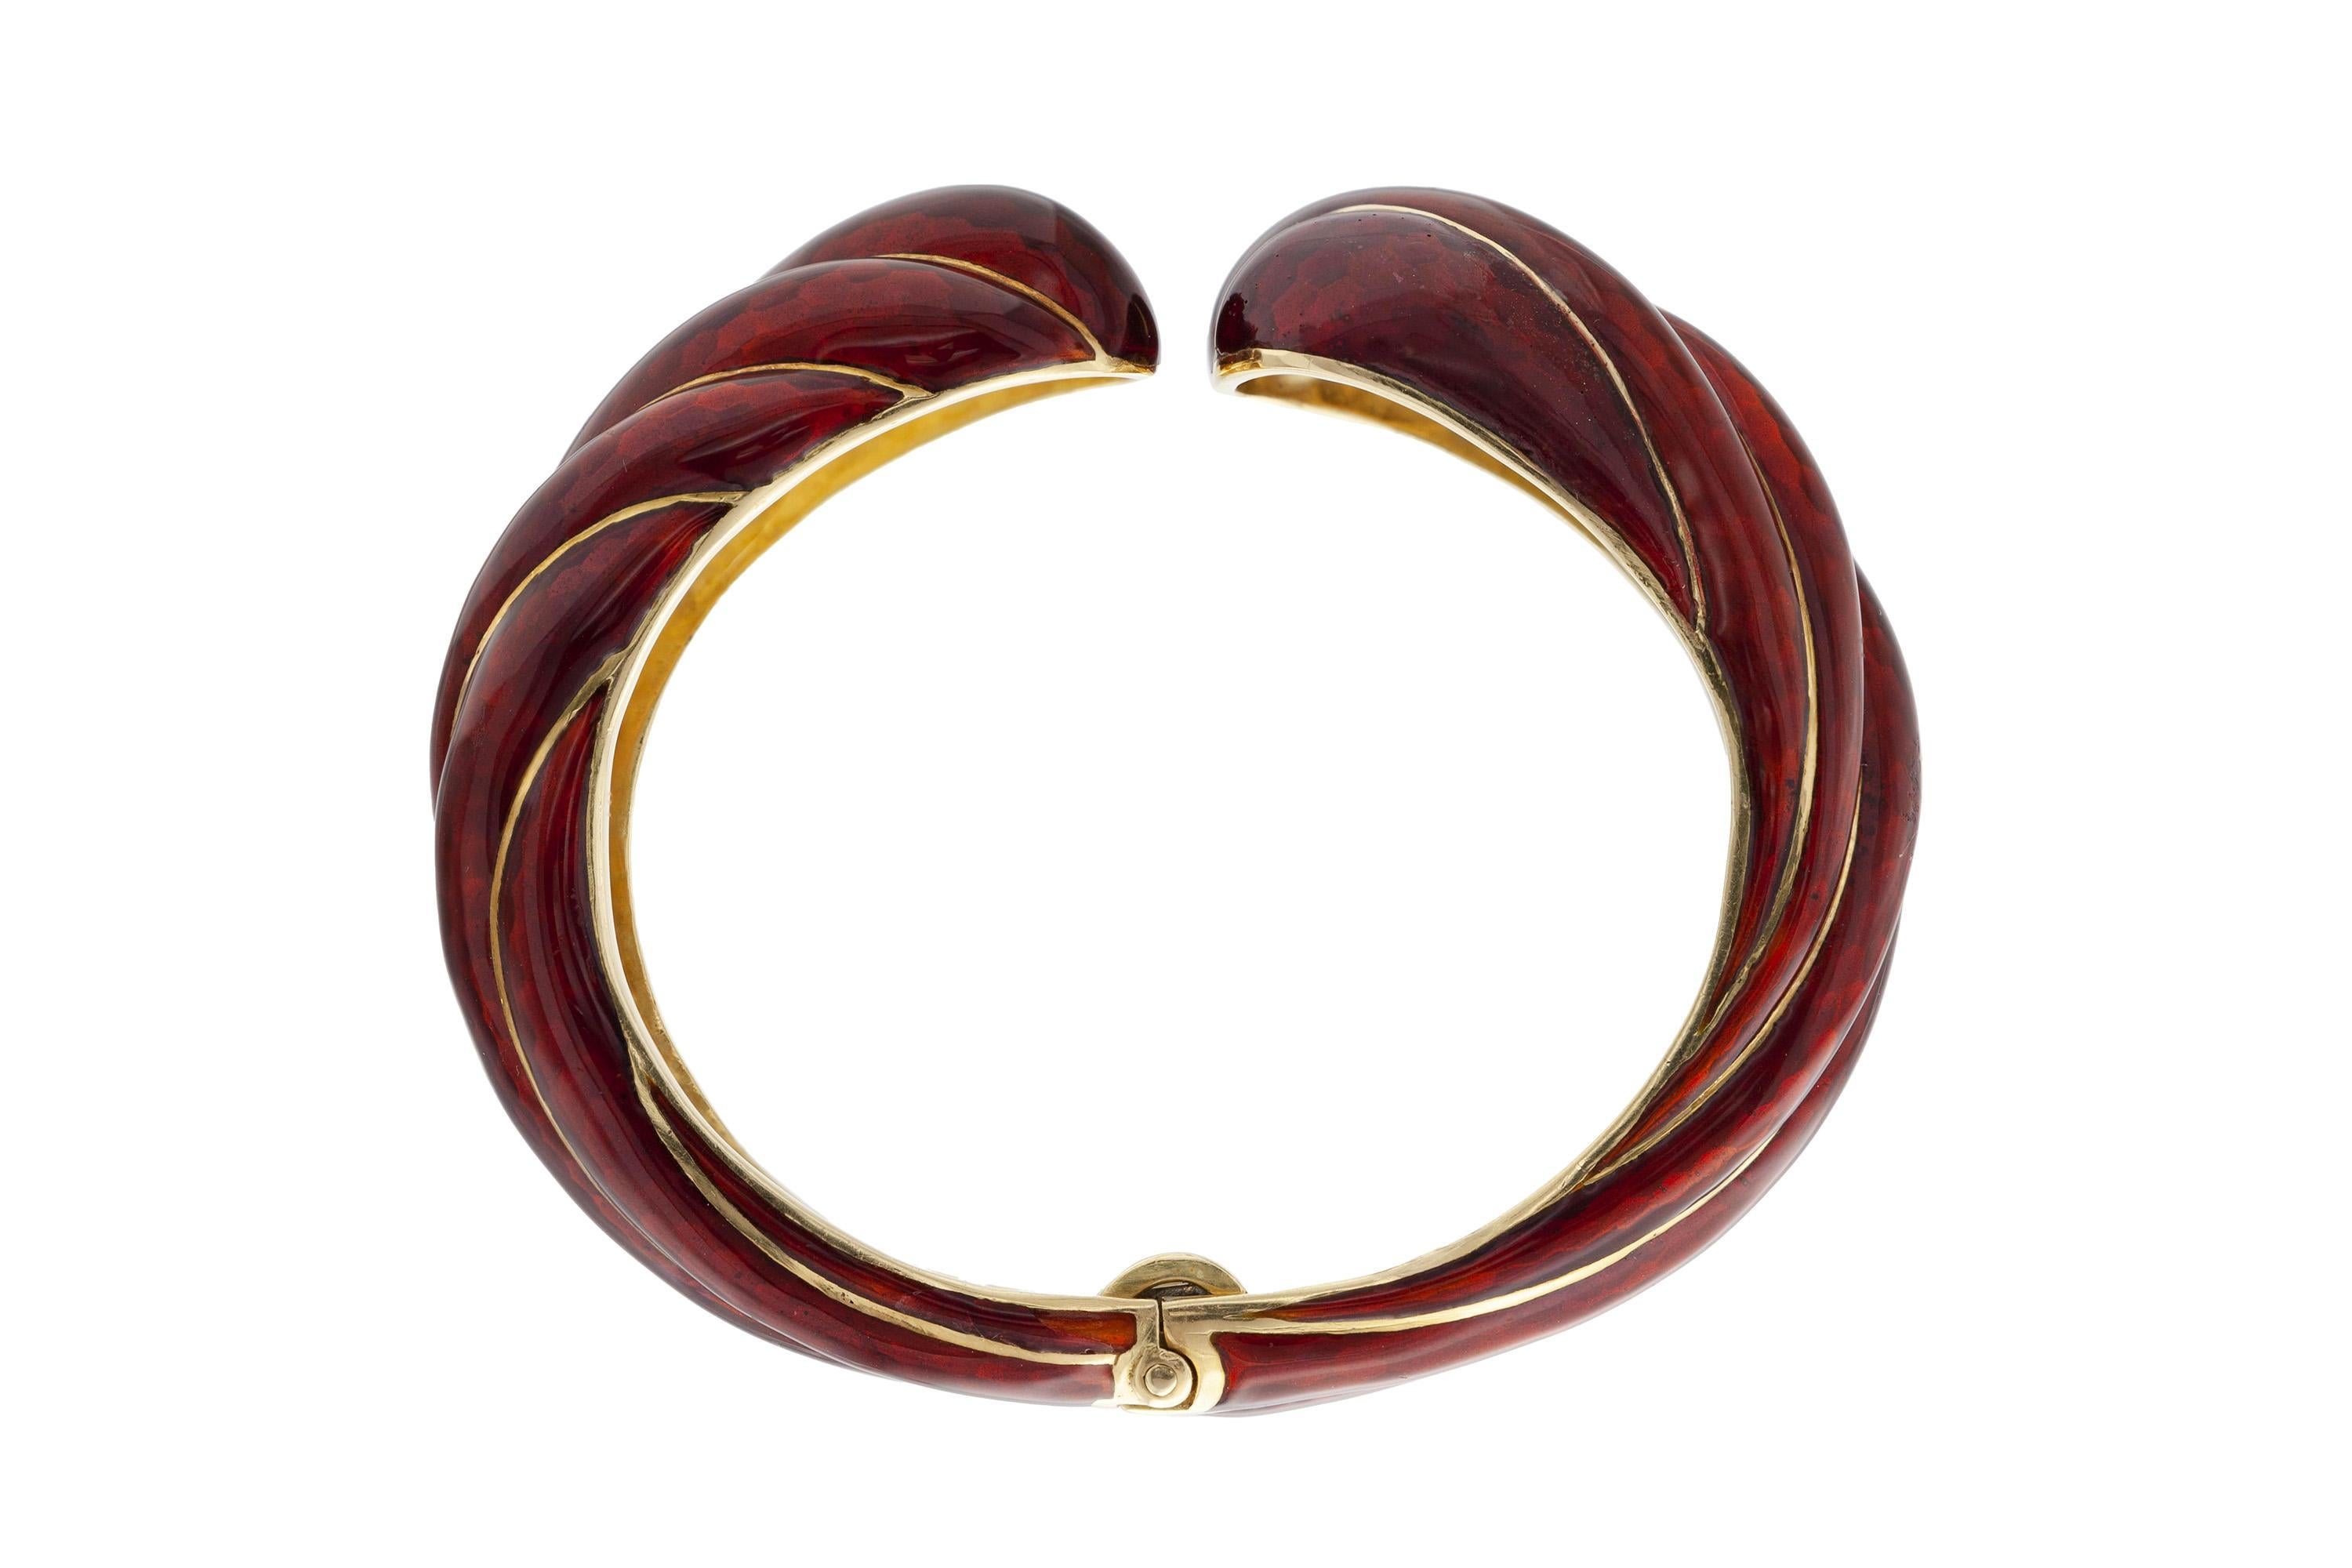 Vintage 1960s David Webb Red Enamel Cuff Bracelet In Good Condition For Sale In New York, NY